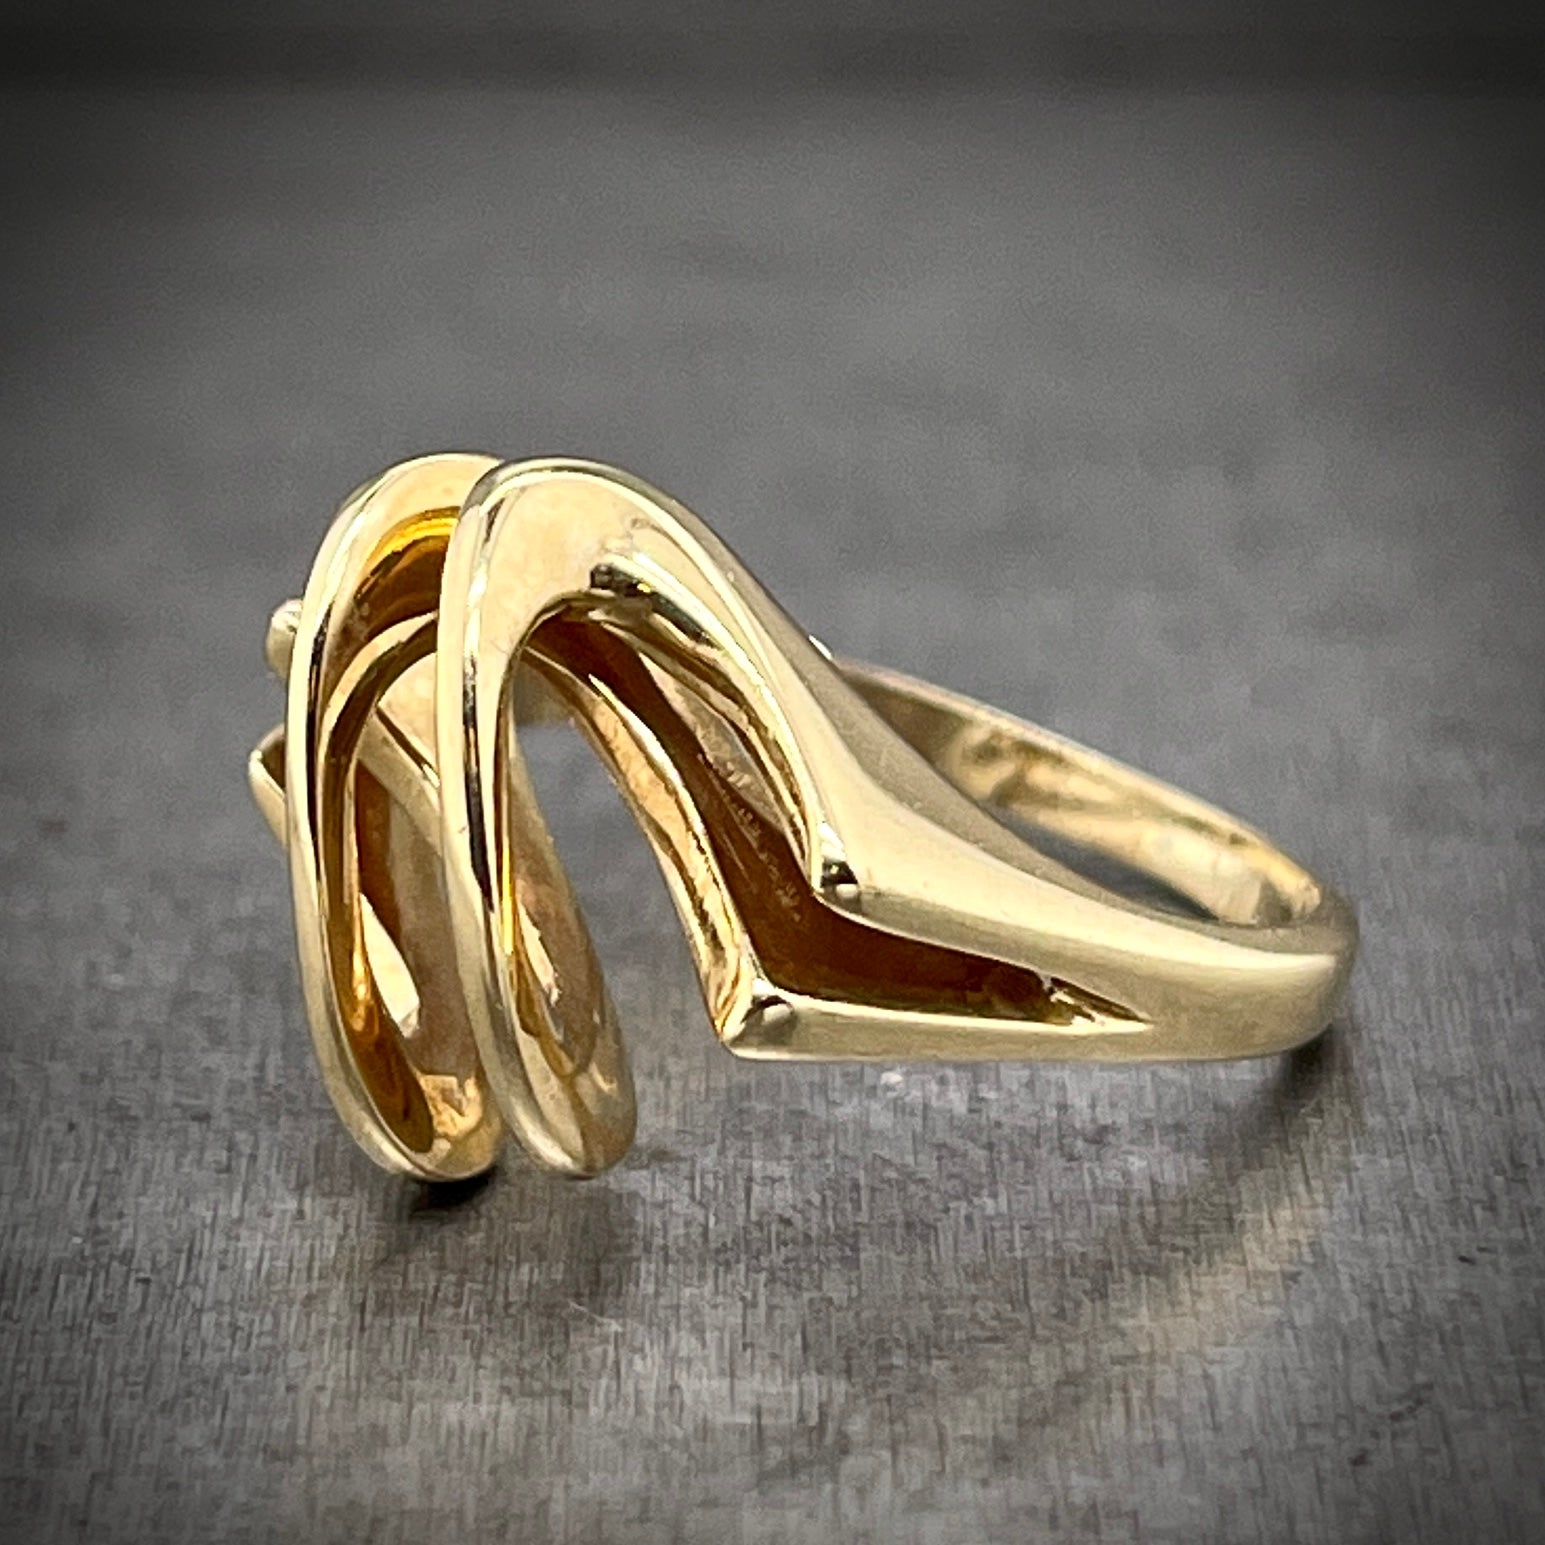 3/4 profile of folded gold ring. here you can see where the two wires meet on the shoulder of the ring and form into one shank.